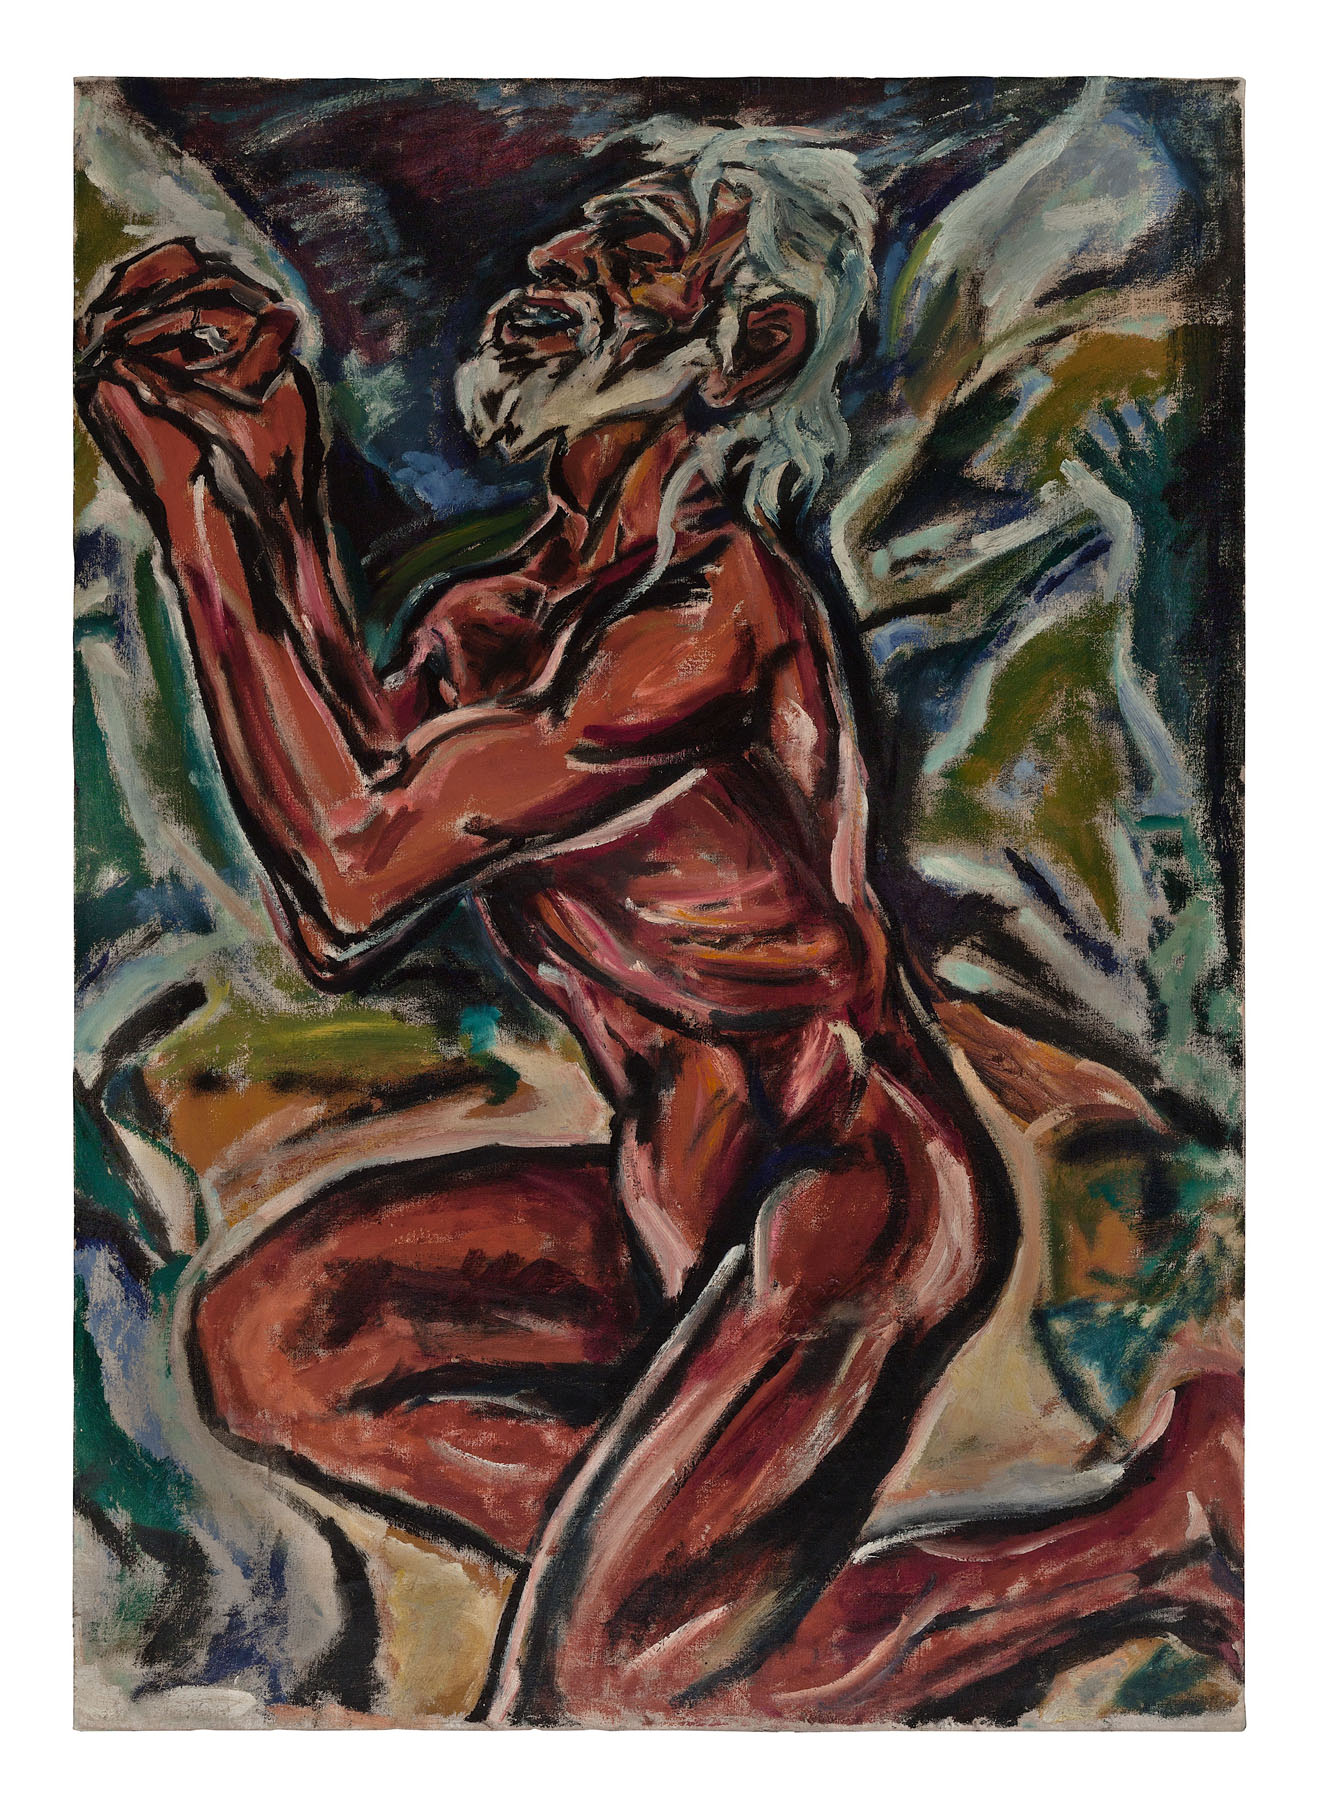 Fritz Ascher, Kneeling Male Nude, c. 1914. Oil on canvas, 47 x 33.5 in. (120 x 85 cm). Private collection. Photo Malcolm Varon ©Bianca Stock